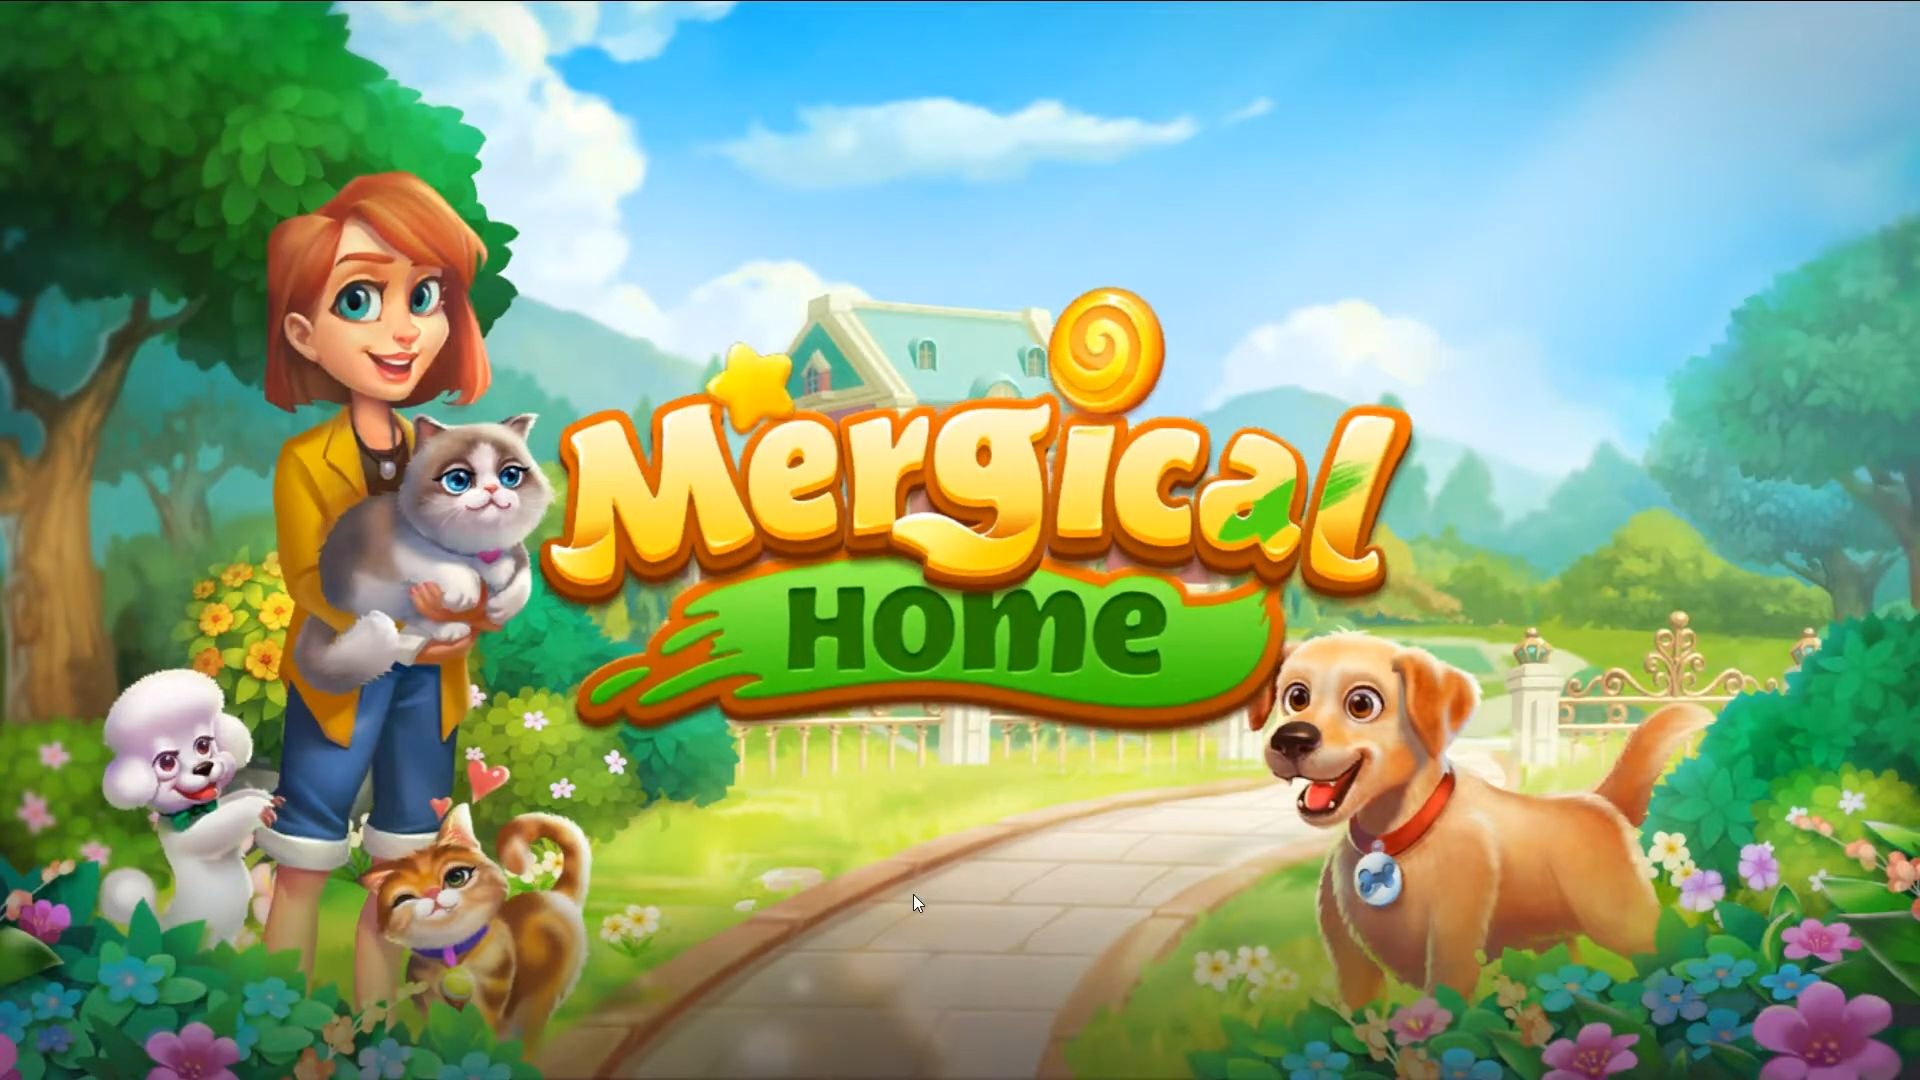 Download Mergical Home Android free game.